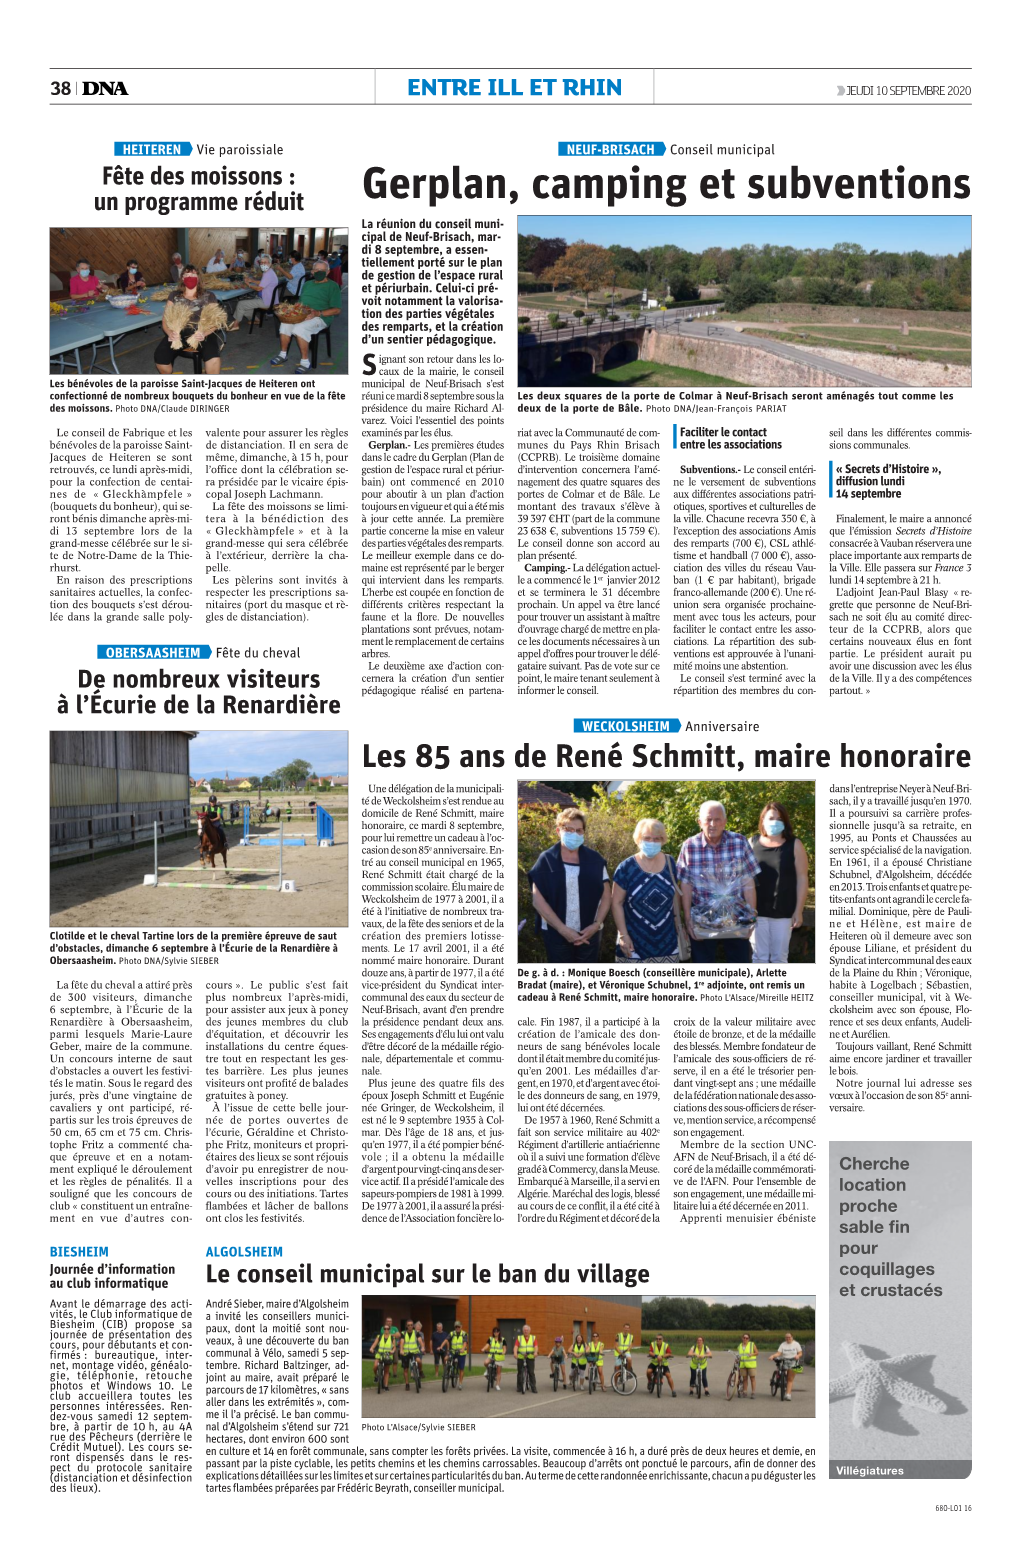 Gerplan, Camping Et Subventions